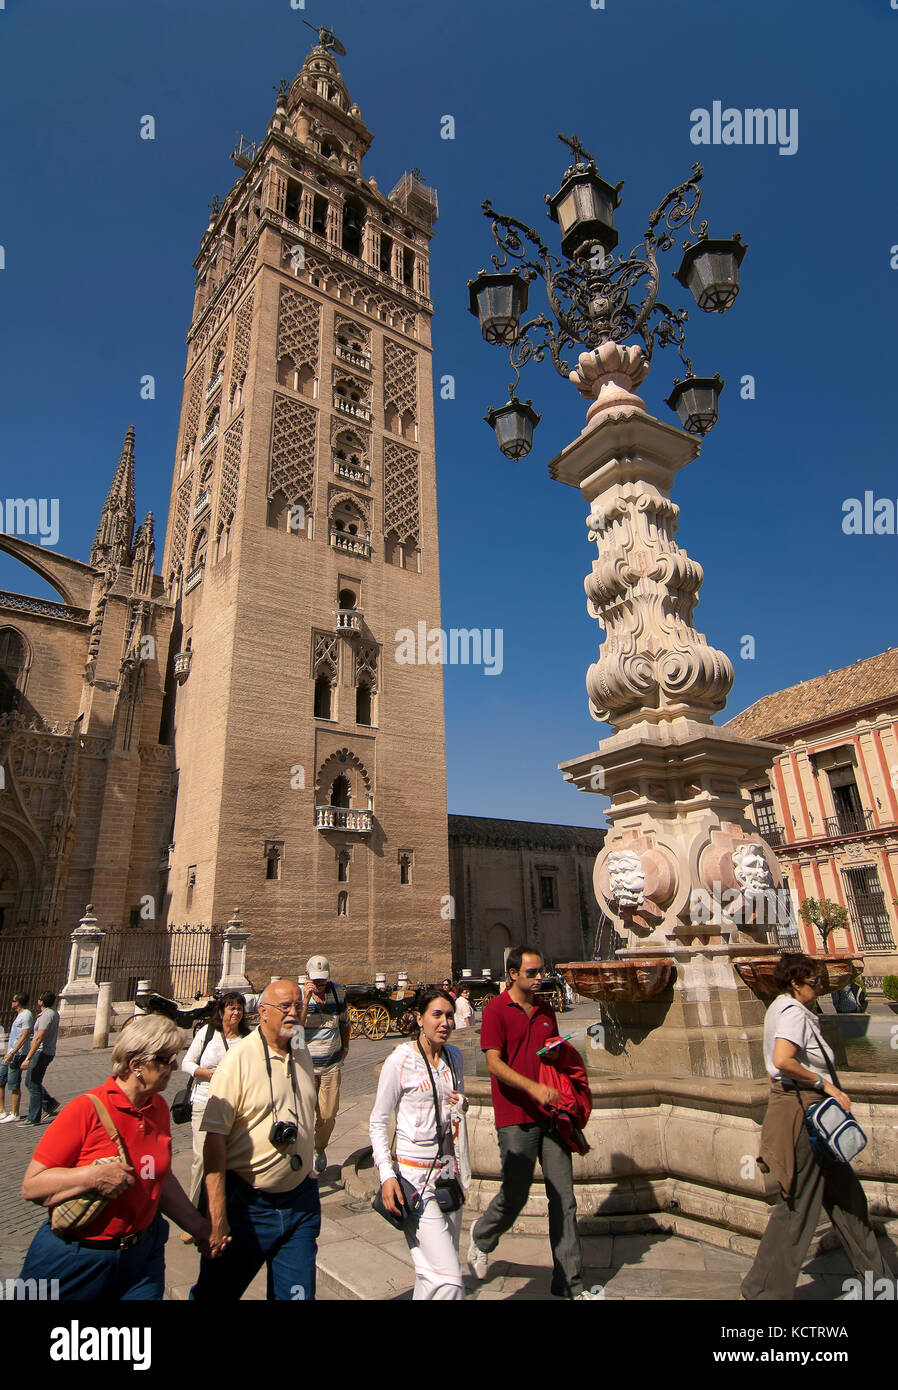 The Giralda and tourists, Seville, Region of Andalusia, Spain, Europe Stock Photo